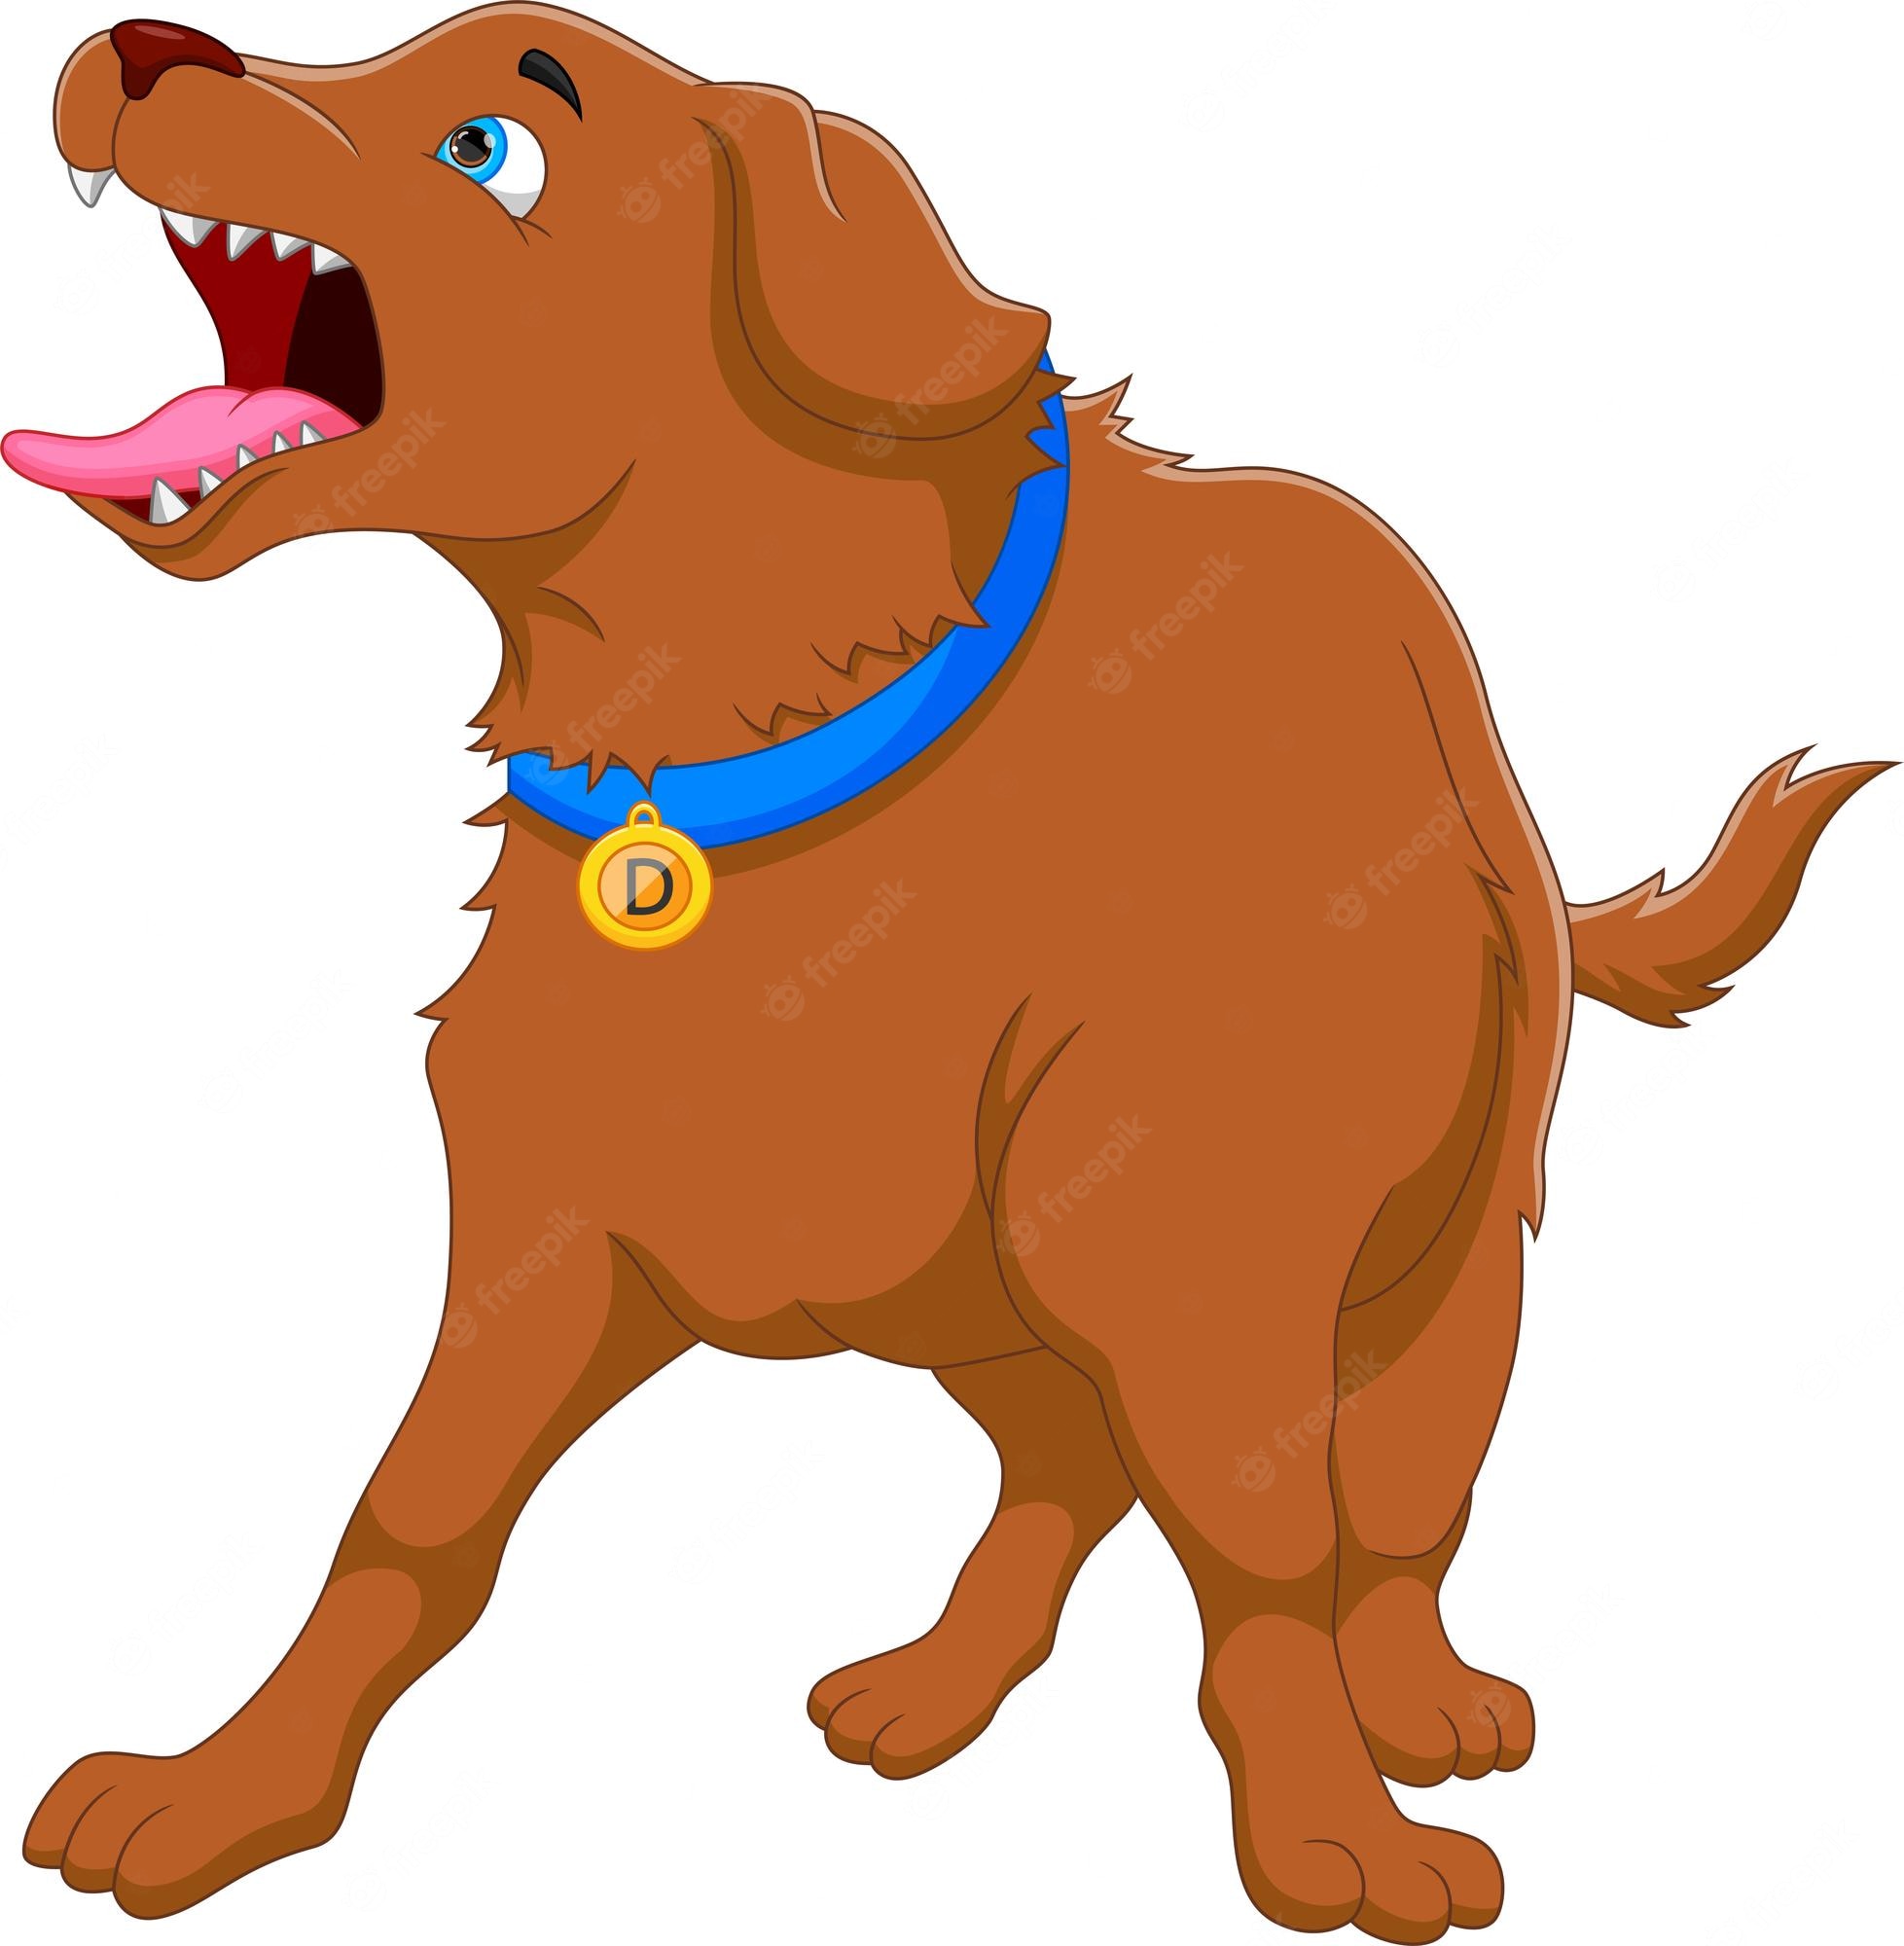 Barking dog clipart #375517 at Graphics Factory. - Clip Art Library